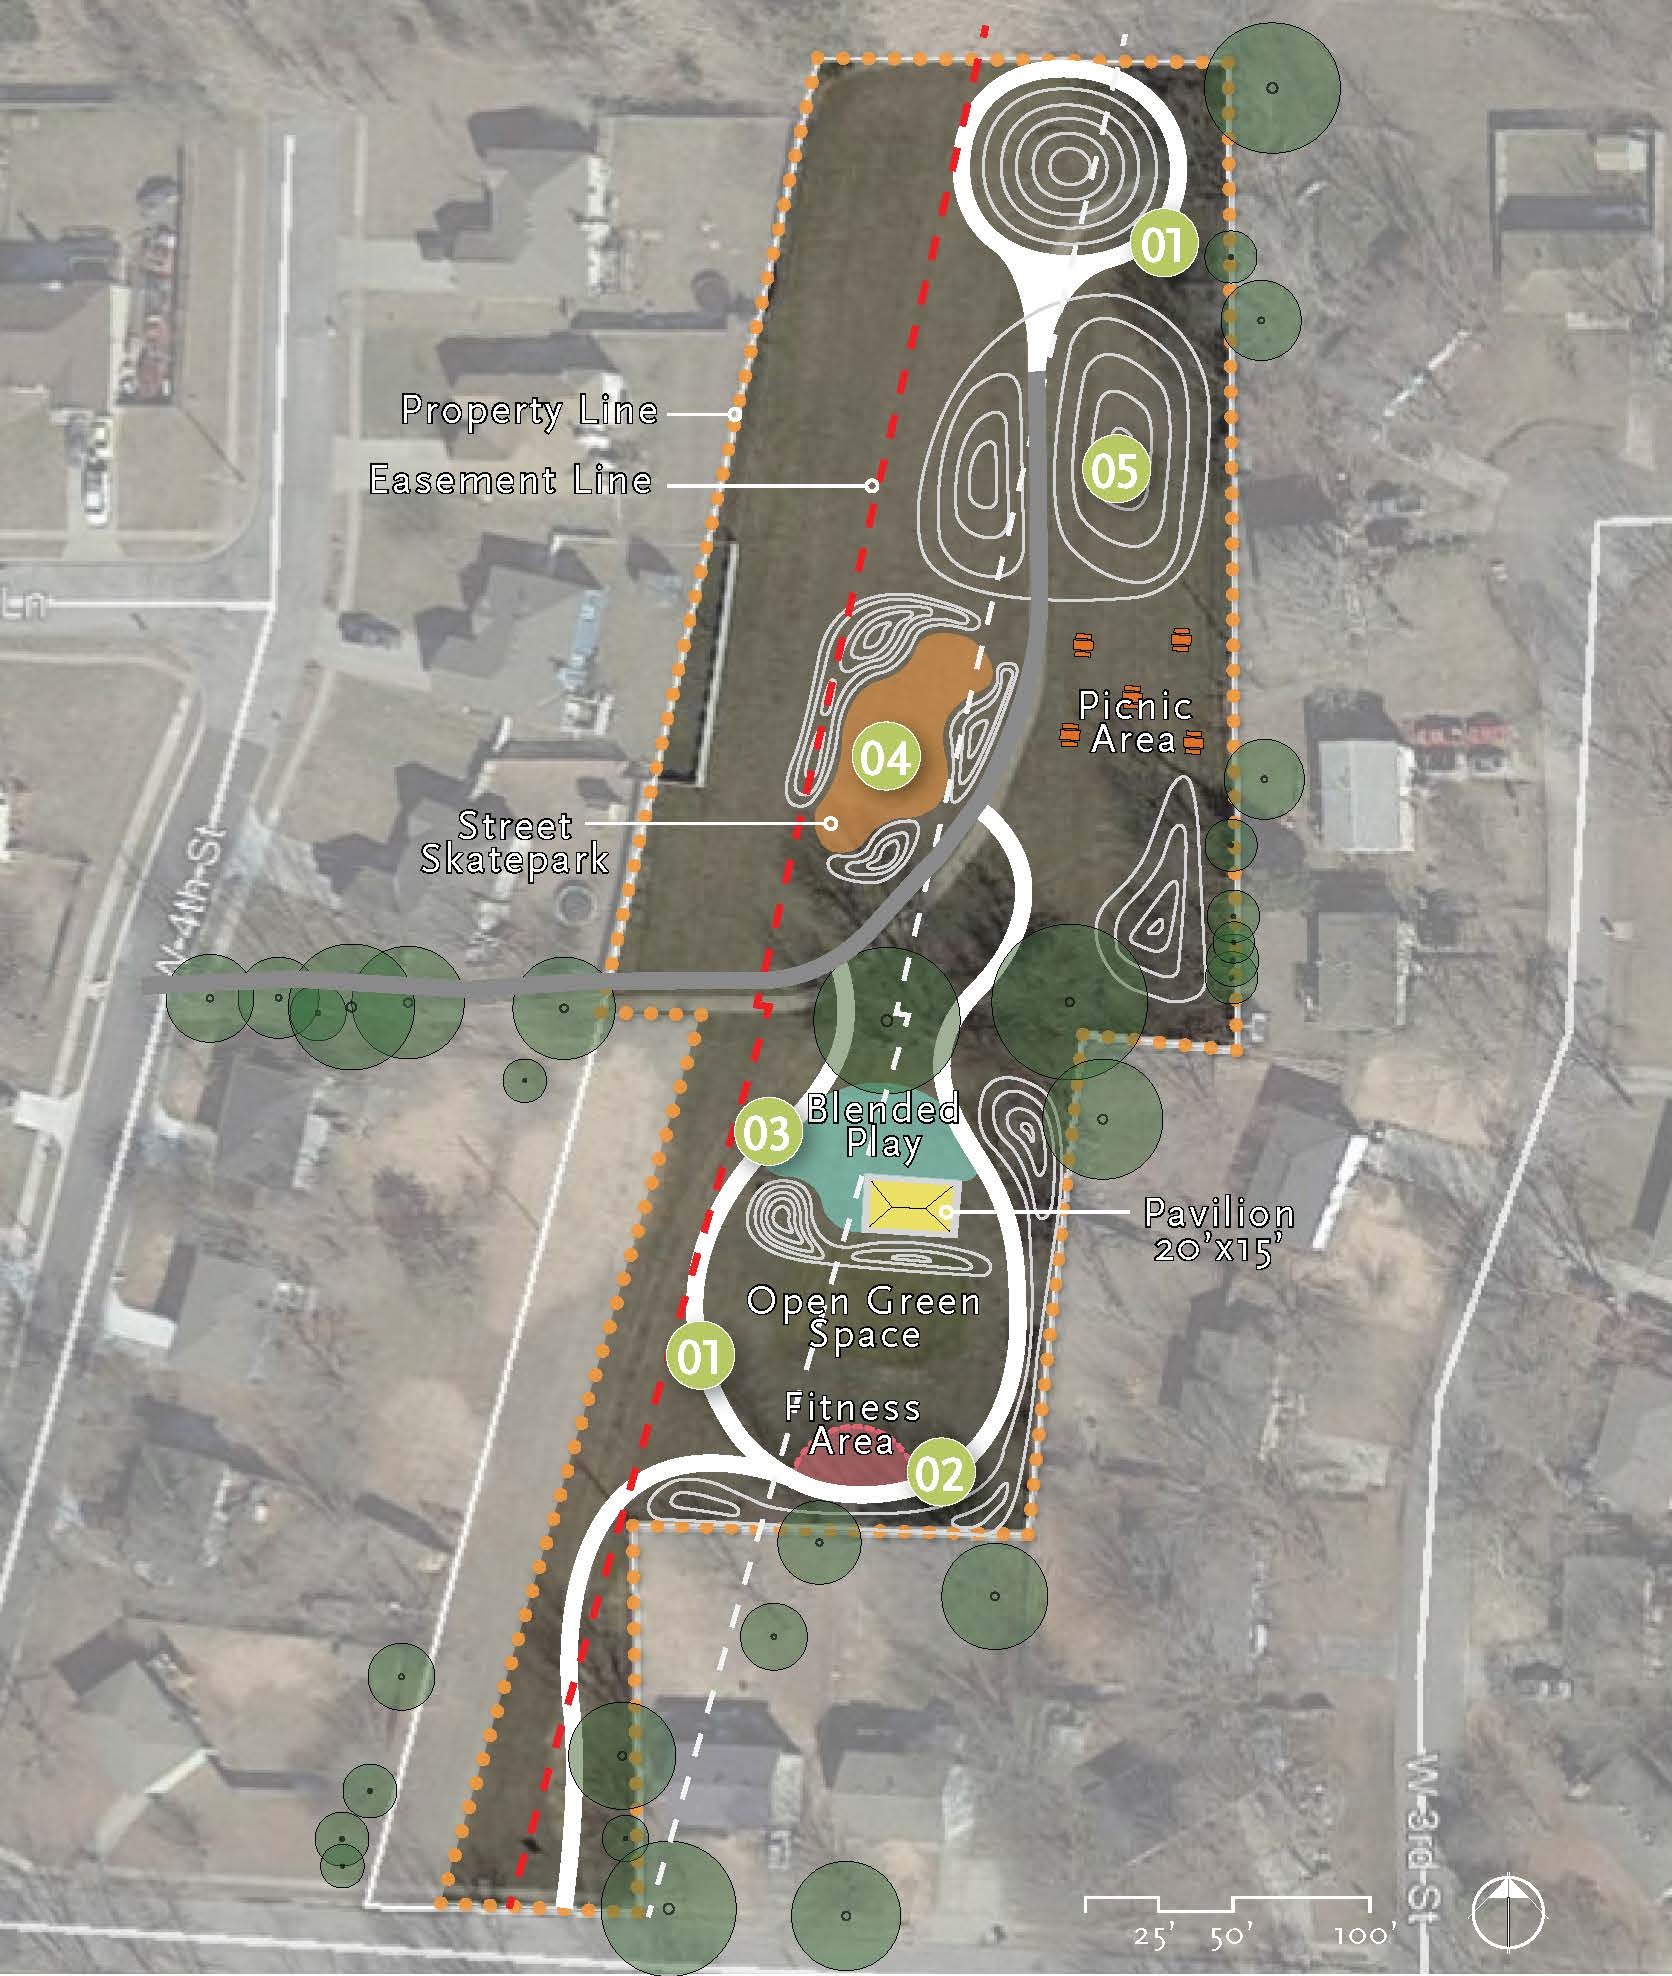 The redesign for Glendell Acres approved by City Council